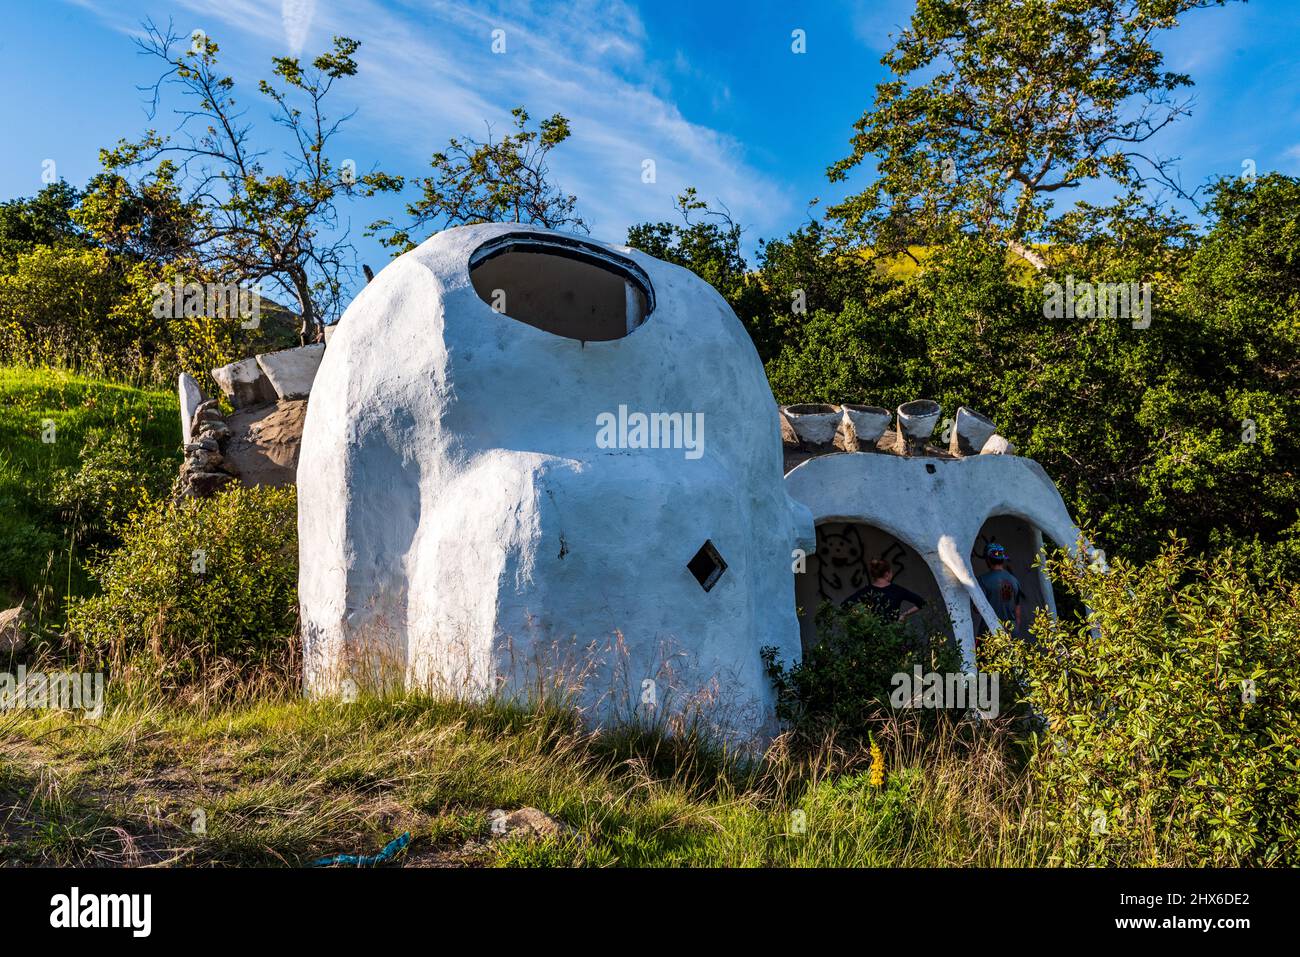 San Luis Obispo, CA /USA - April 2, 2016: Round house structure at Cal Poly Architectural Graveyard. Stock Photo